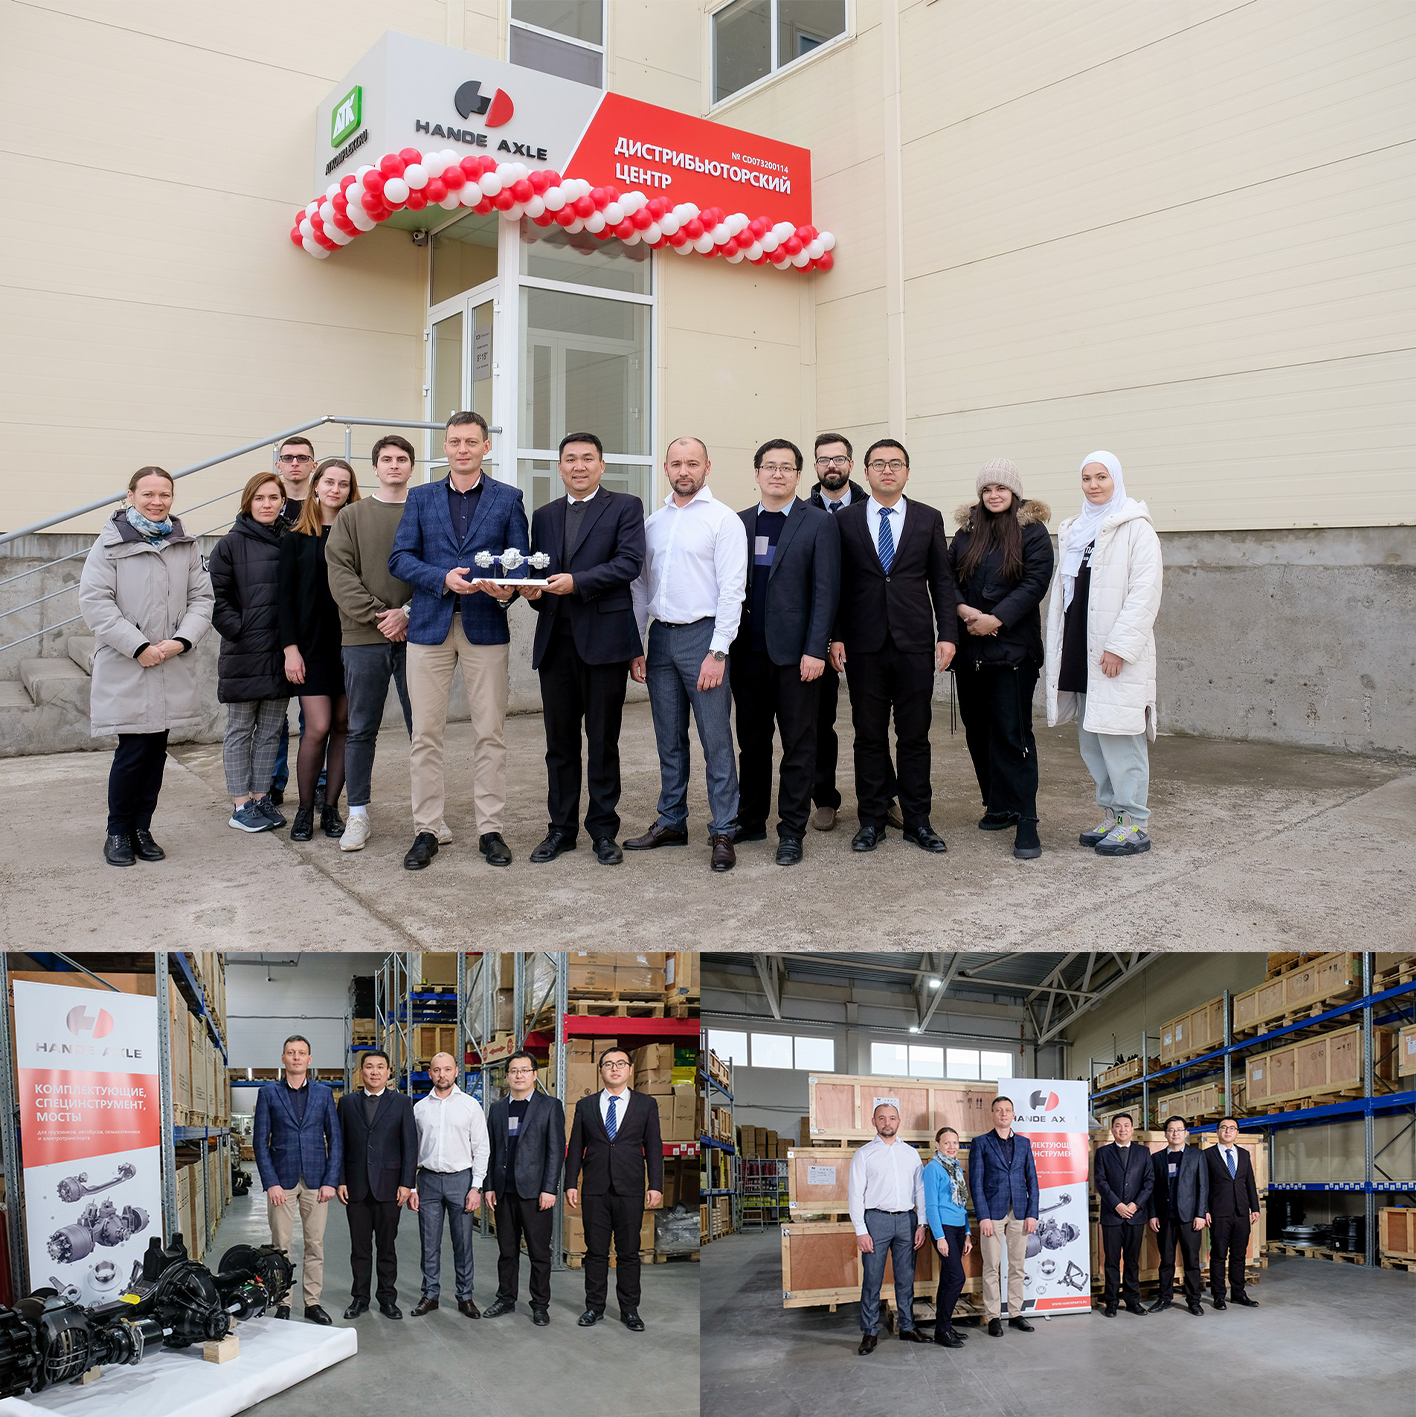 An official Distribution Centre of HanDe Axle spare parts for commercial vehicles opened in overseas market.